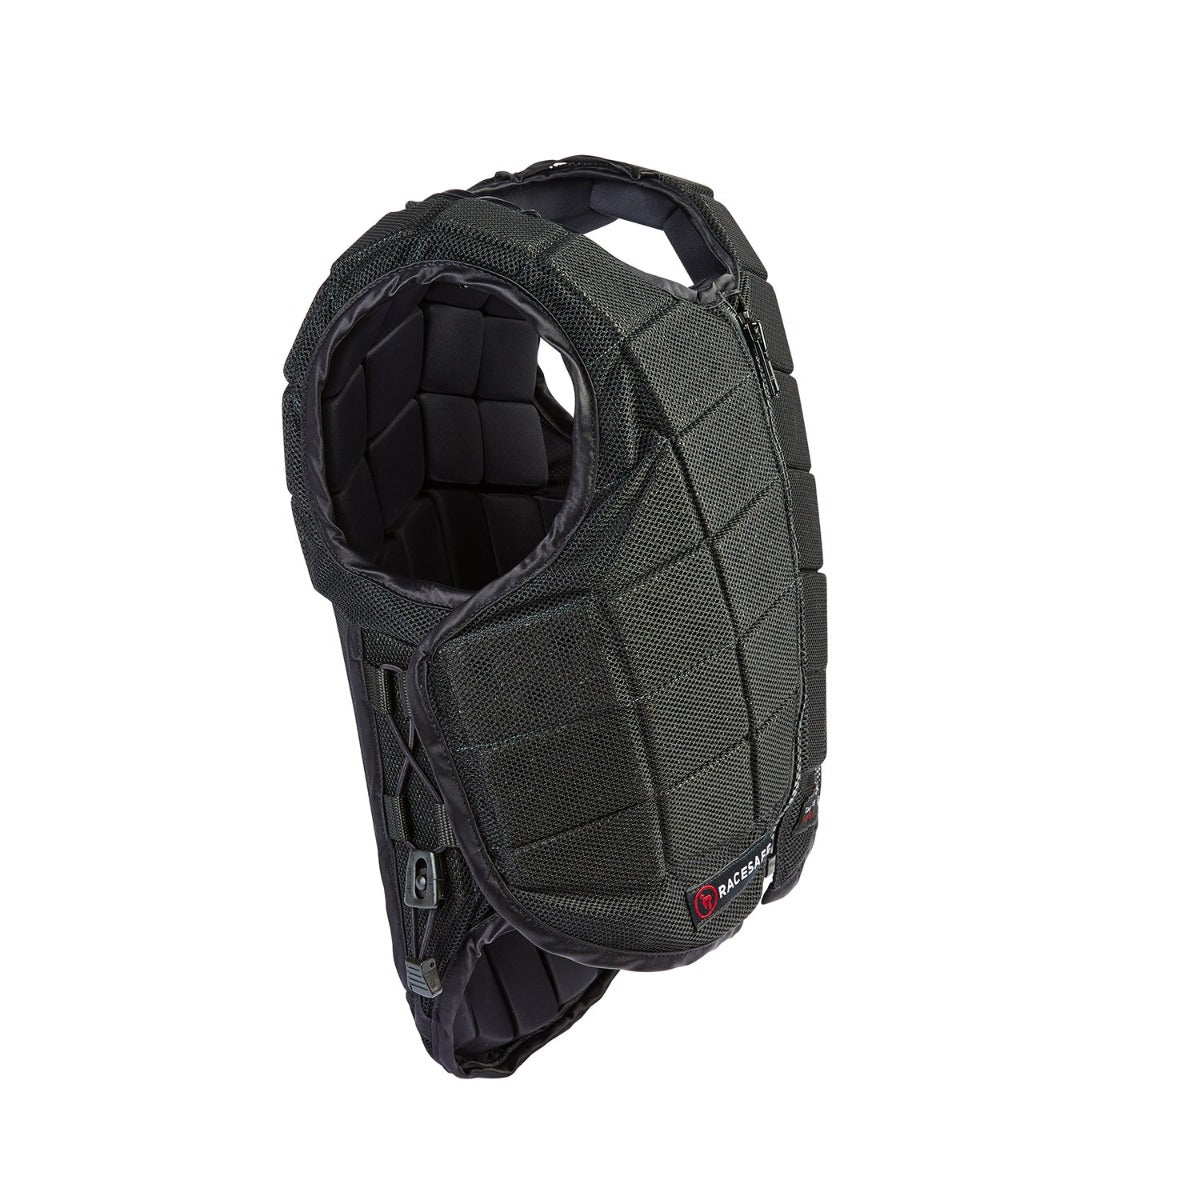 Racesafe Childs Provent Contour 3.0 Body Protector